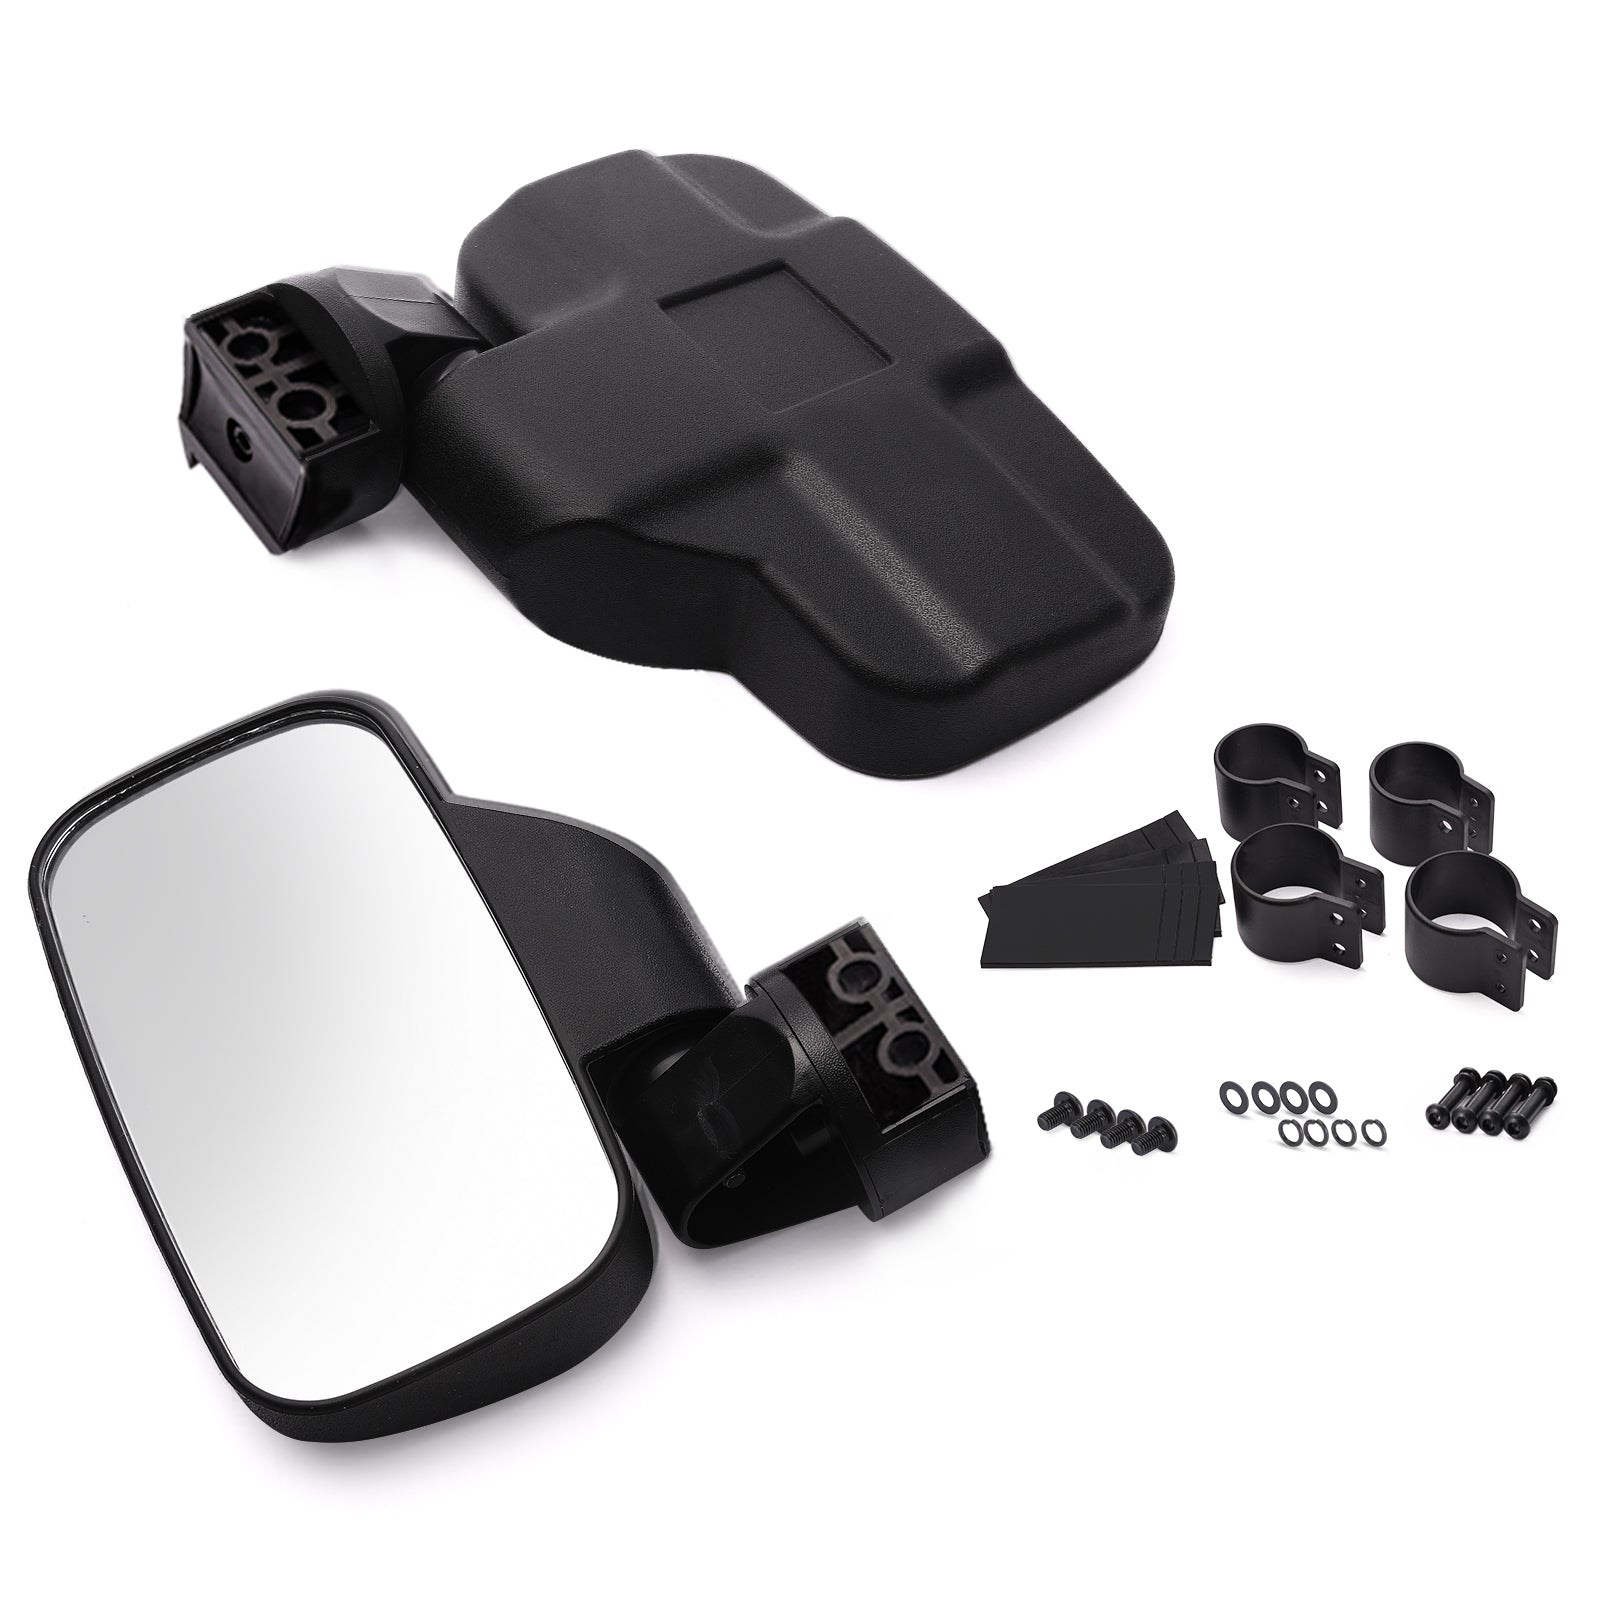 UTV Side View Mirror Set with Shock-proof Rubber Pad for 1.75"-2" Roll Cage Polaris Ranger RZR Can-Am Maverick and more